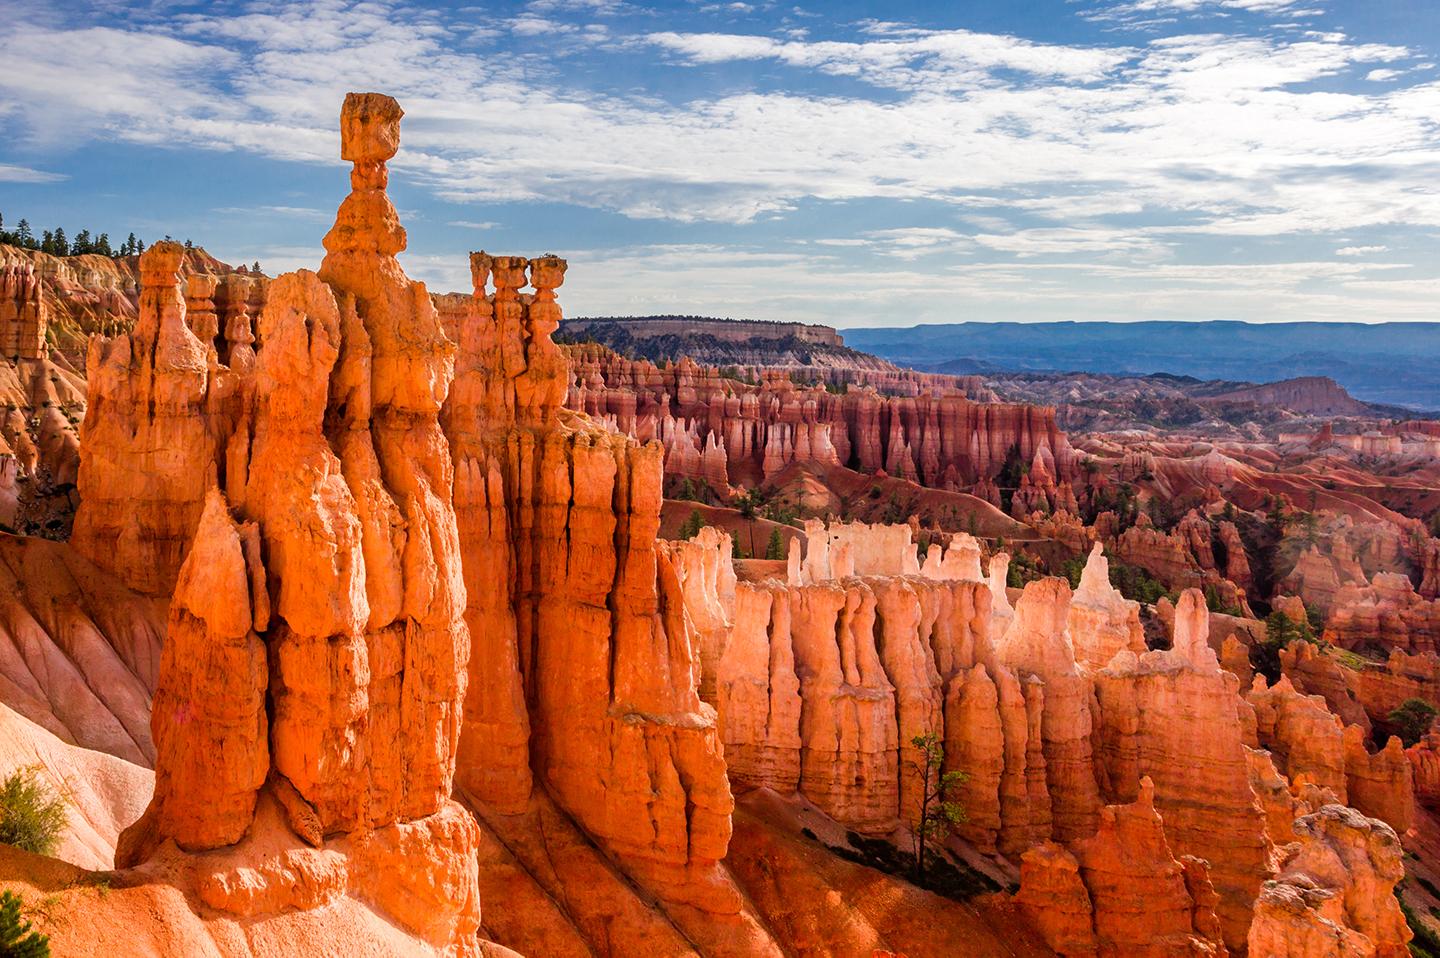 Visit iconic landmarks like Bryce Canyon with United States tours & excursions